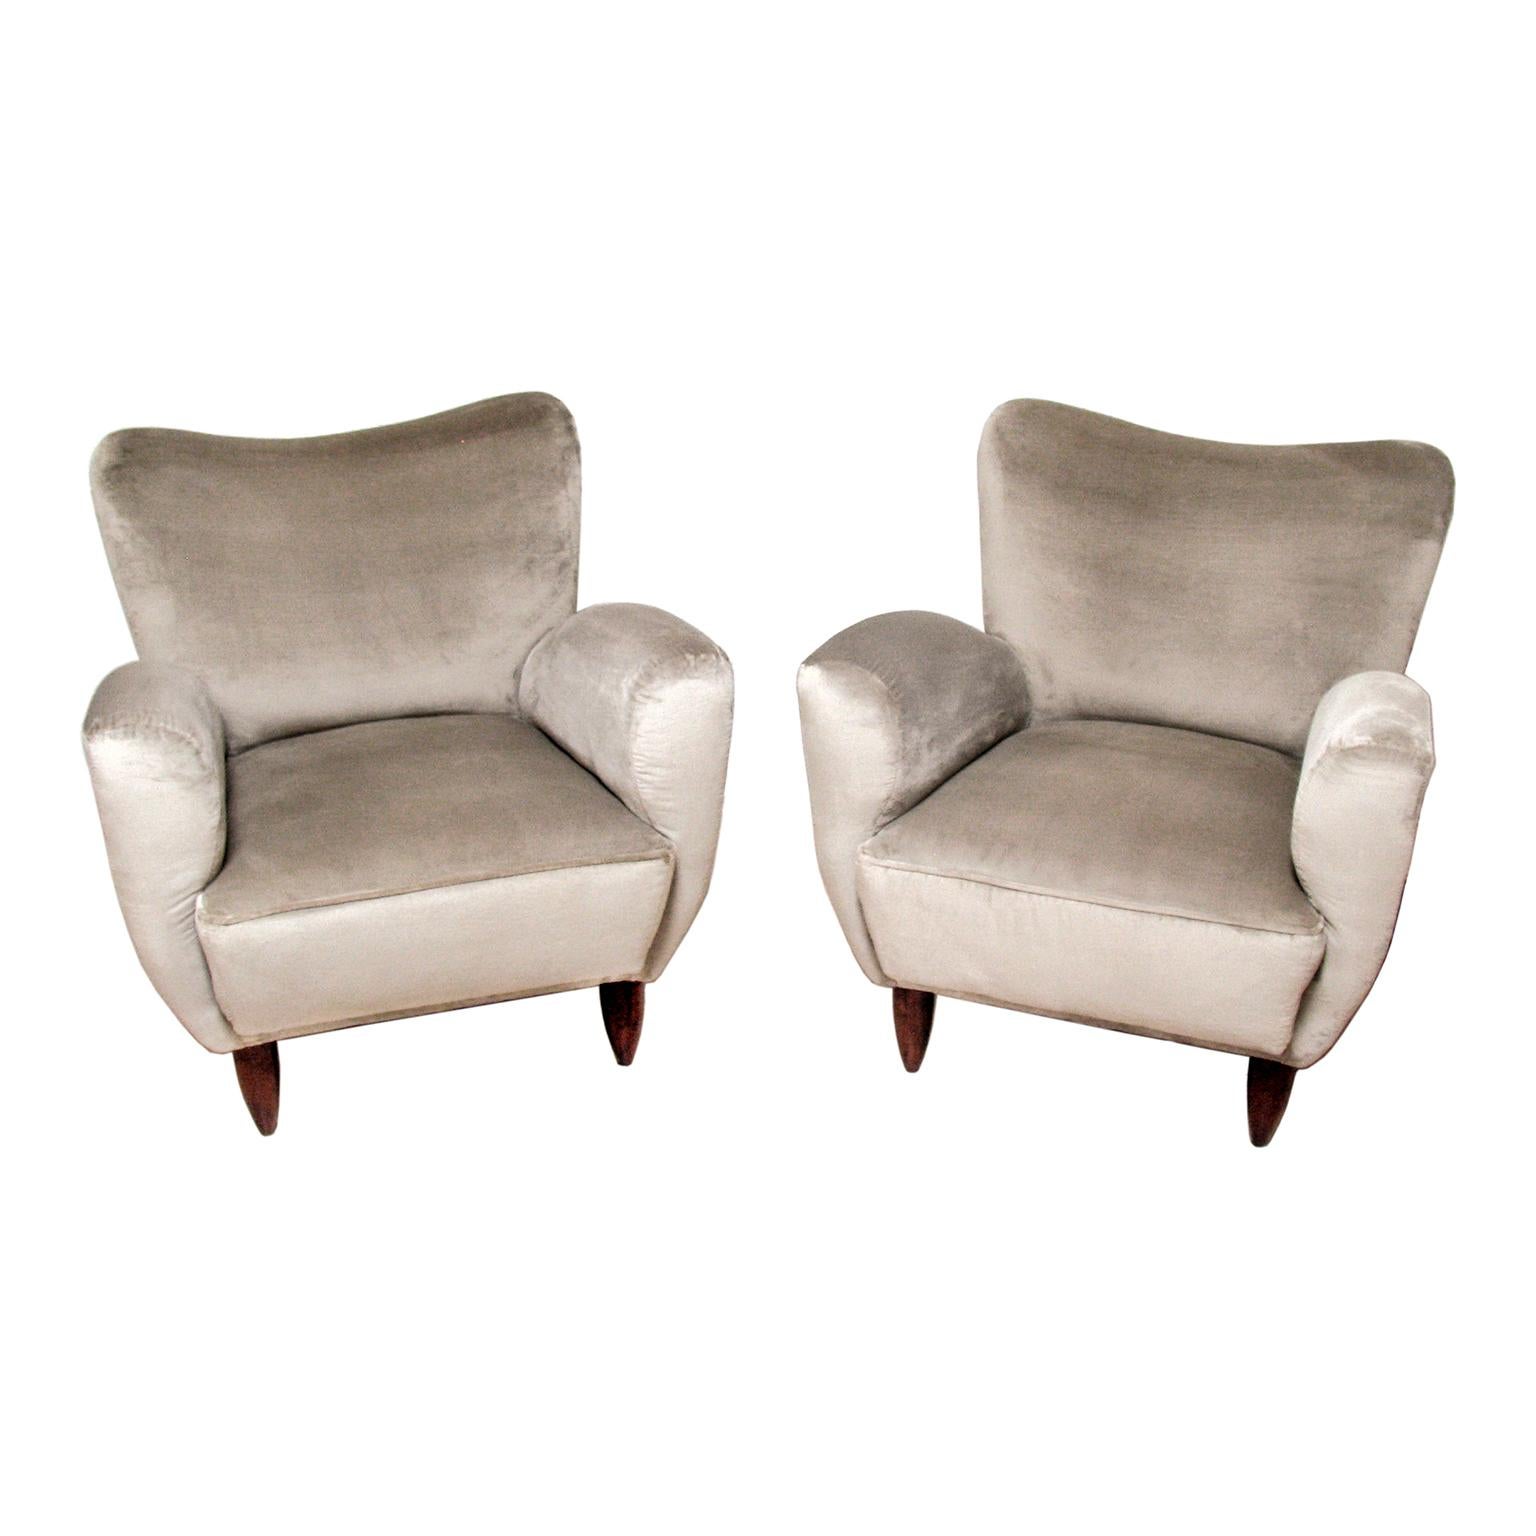 Pair of Italian armchairs, circa 1950.
Wood structure, feet in lacquered wood, covered with silver-gray luxurious Rubelli velvet.

Dimensions:
Width 72 cm (28.35 in.), depth 70 cm (27.56 in.)
Height 70 cm (27.56 in.), seat height 38 cm (15